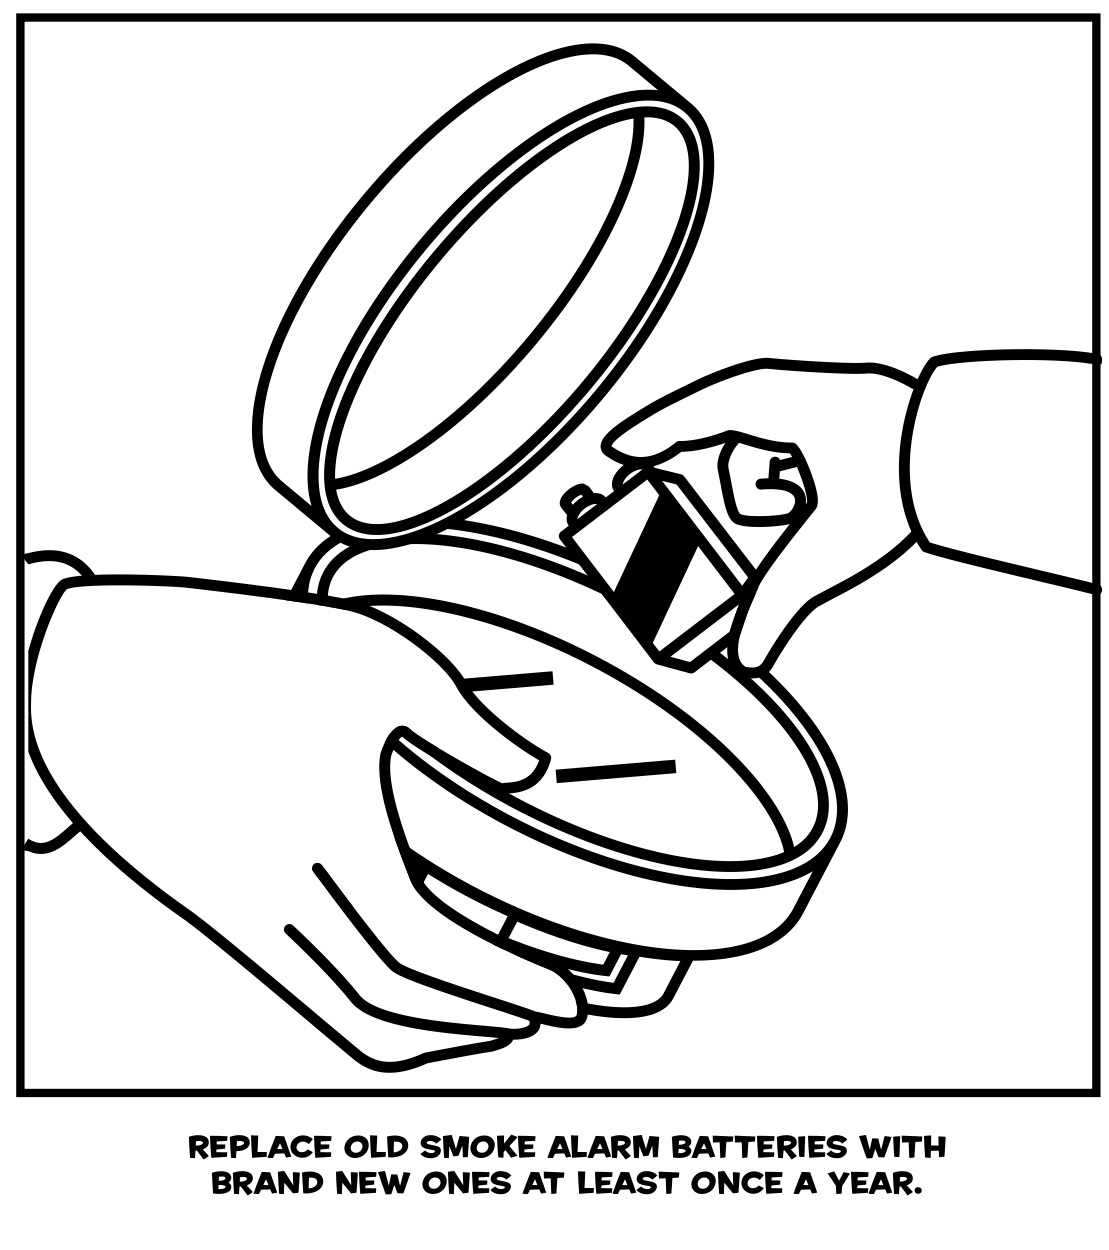 Replace Old Smoke Alarm Batteries With Brand New Ones At Least Once A Year Coloring Page